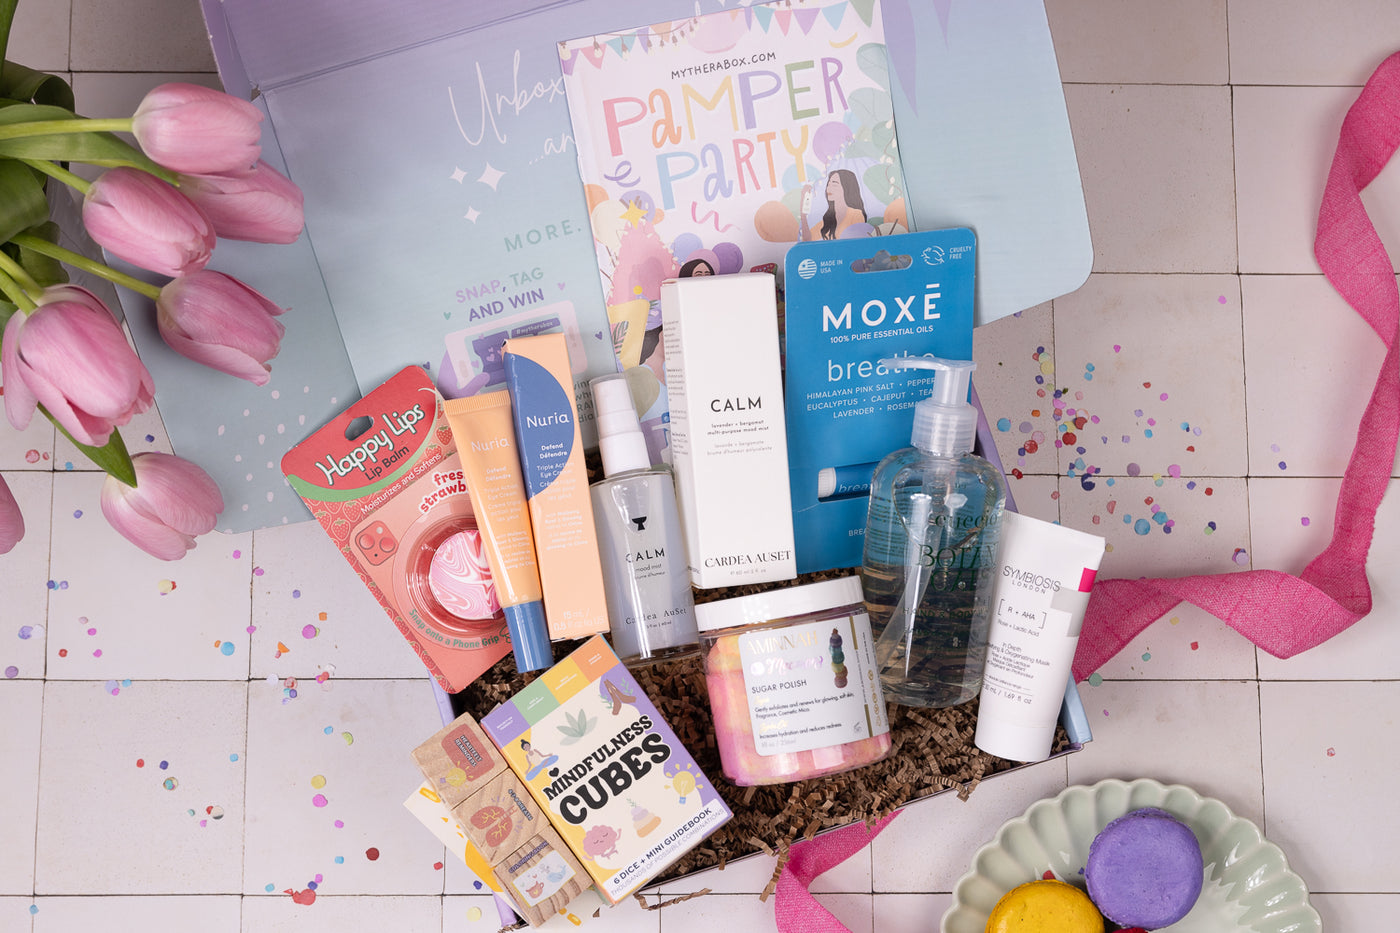 TheraBox Pamper Party box - Inside the box